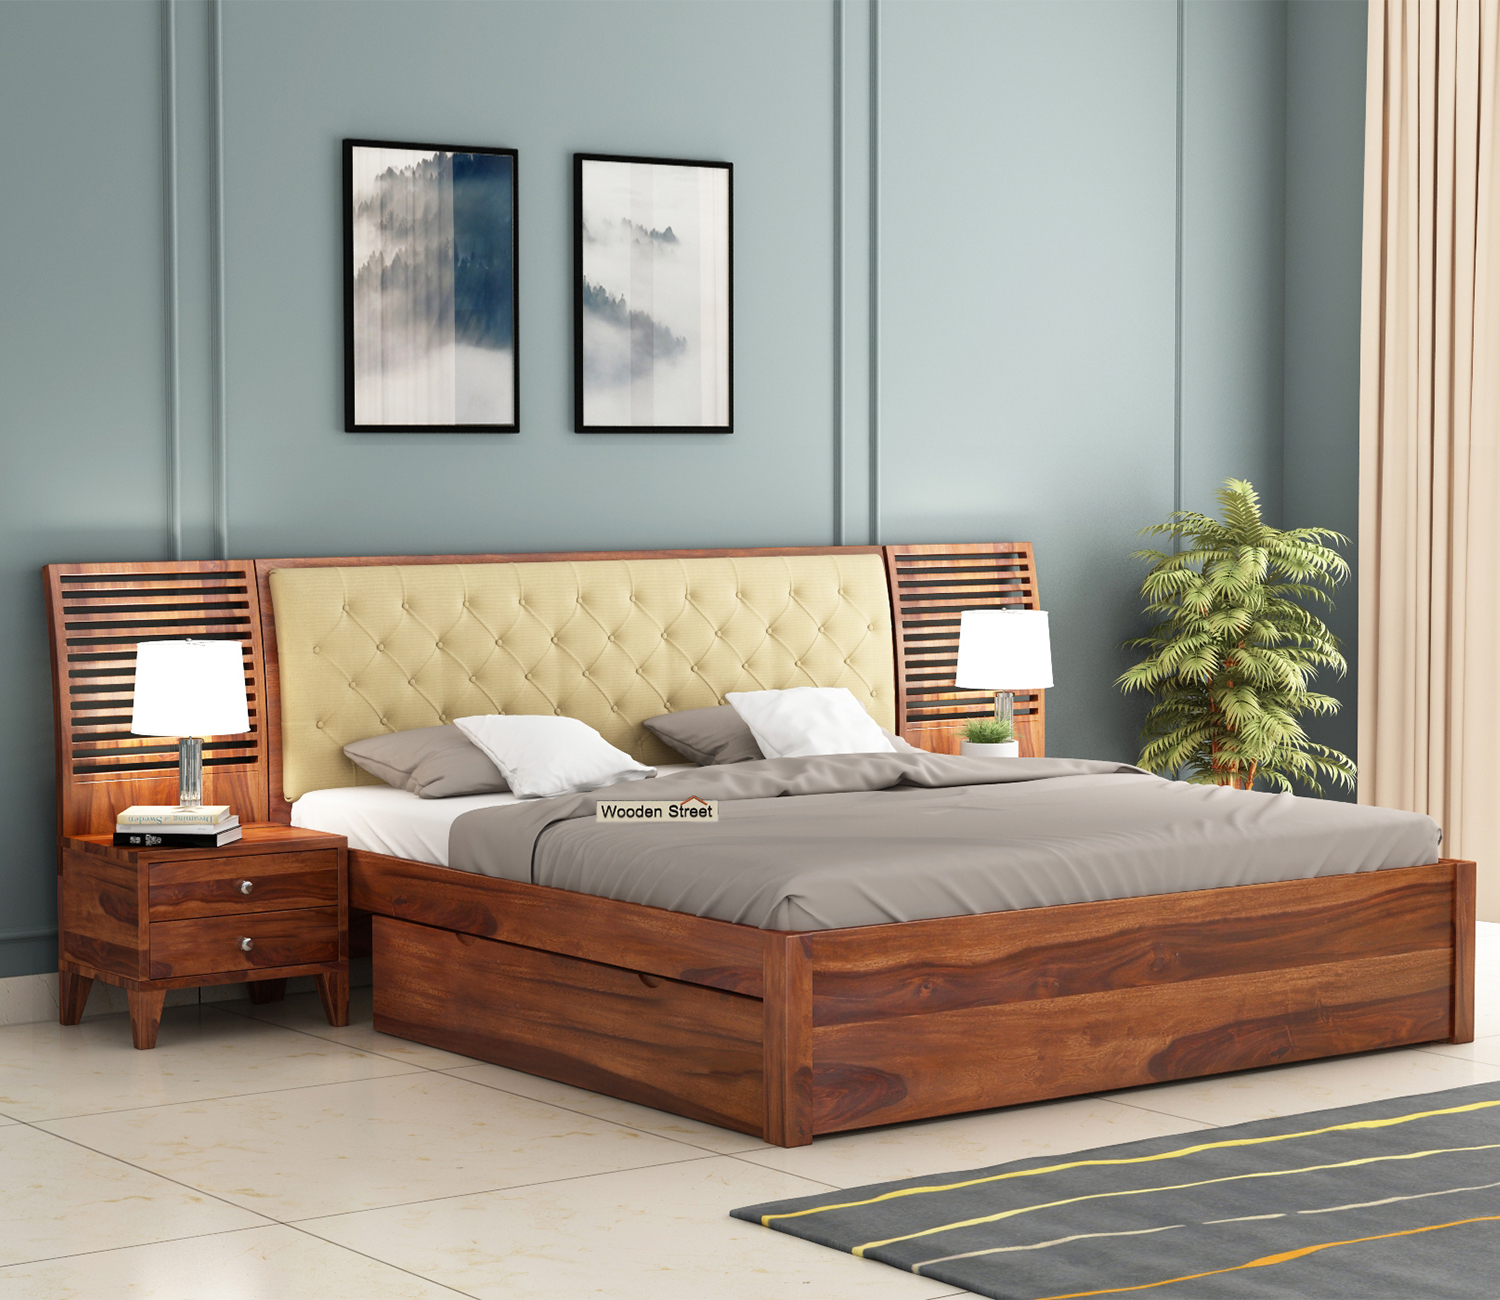 Persia Upholstered Bed With Side Storage And 2 Bedside Tables | WoodenStreet